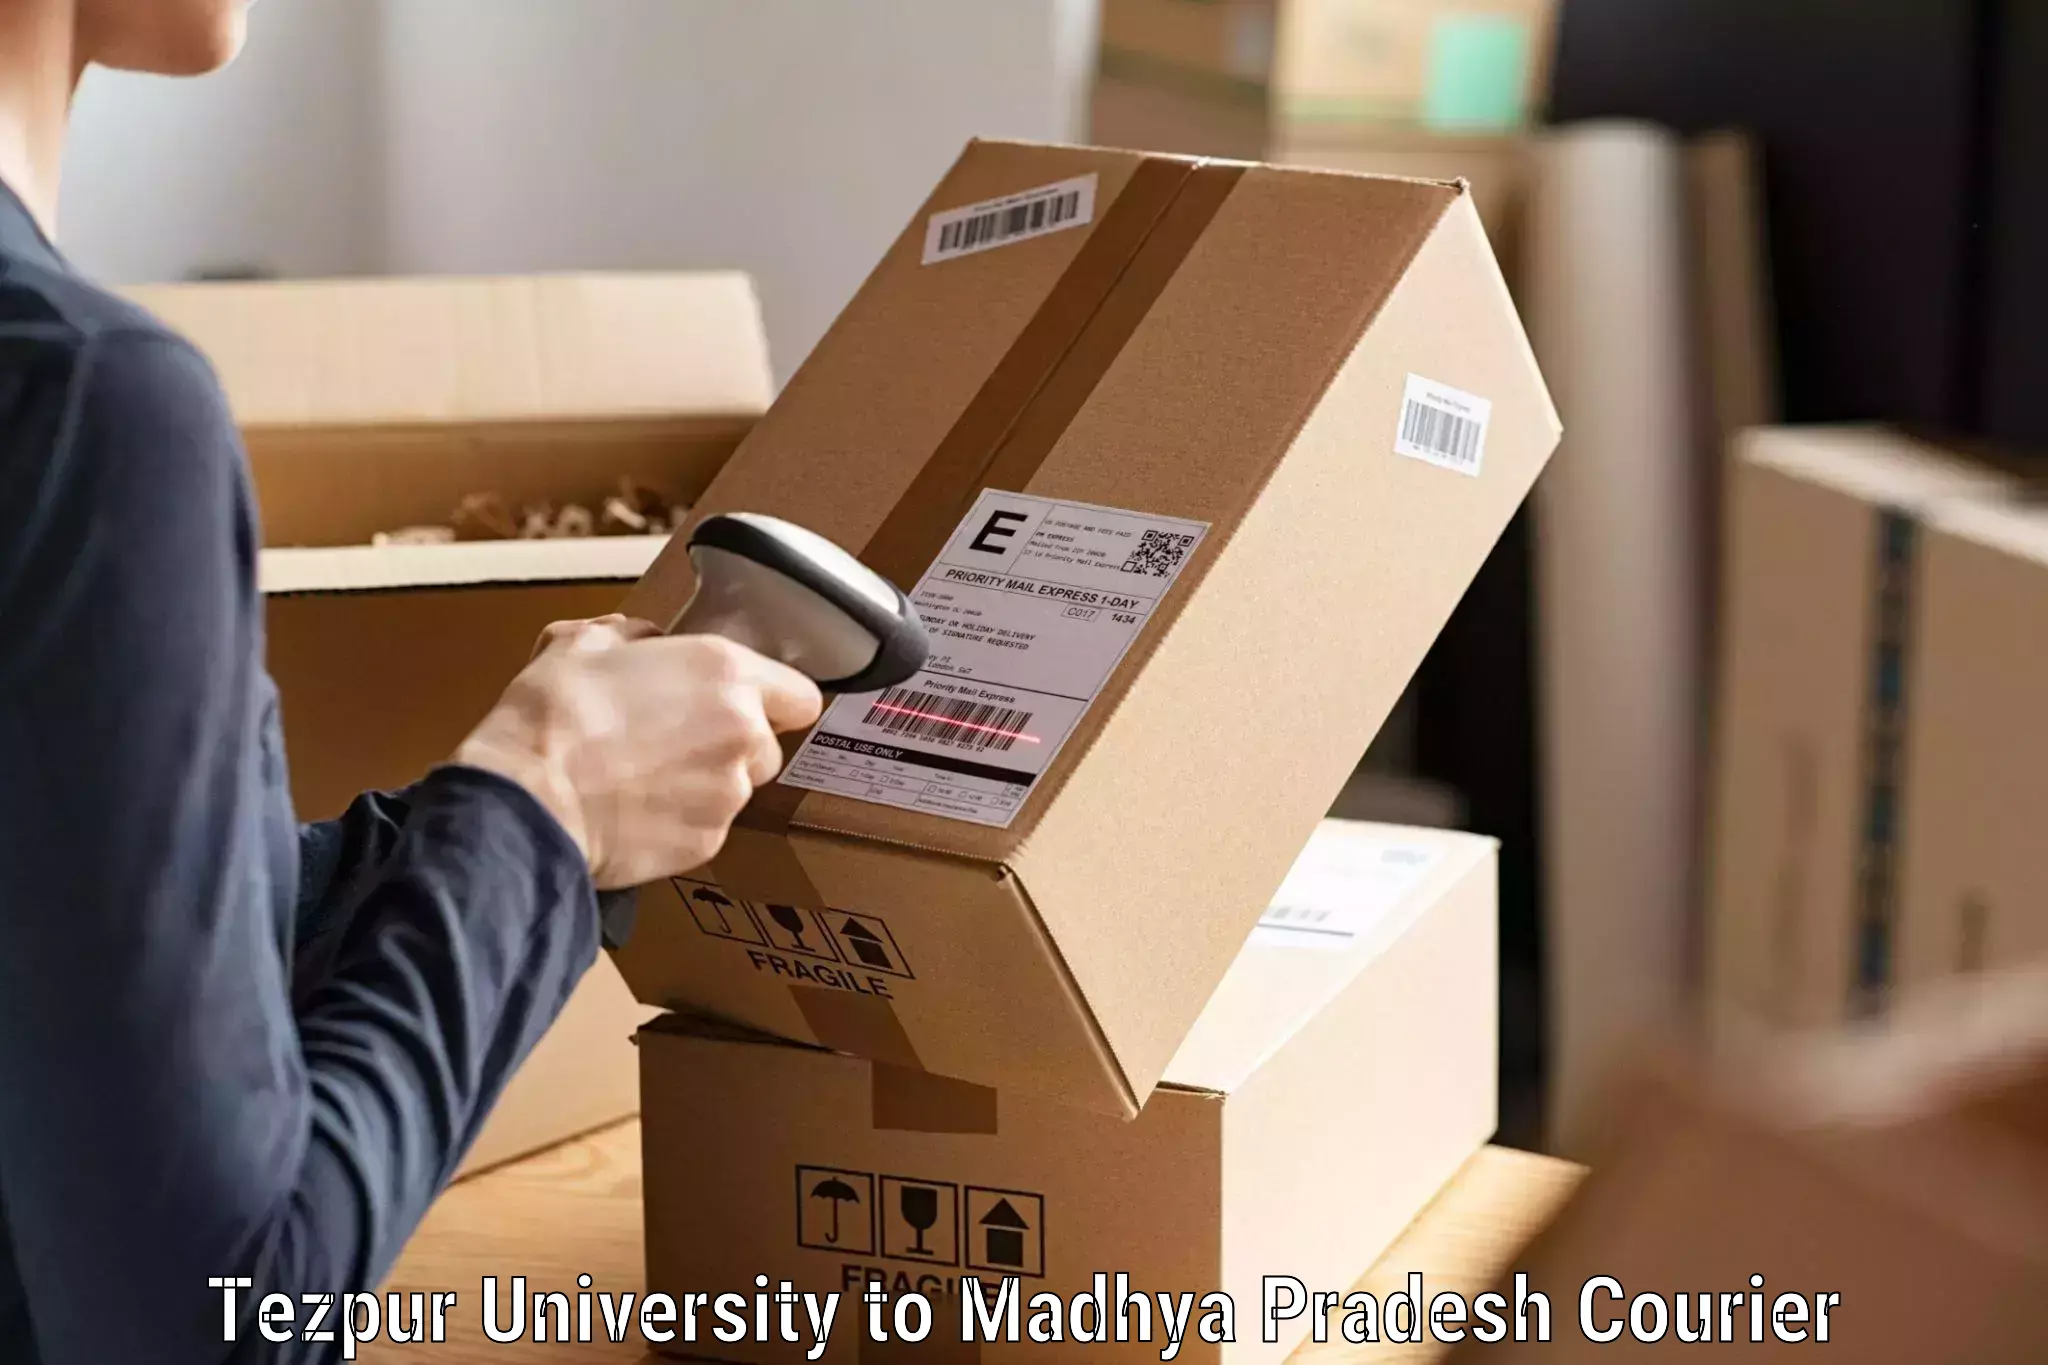 Express delivery solutions Tezpur University to Ranchha